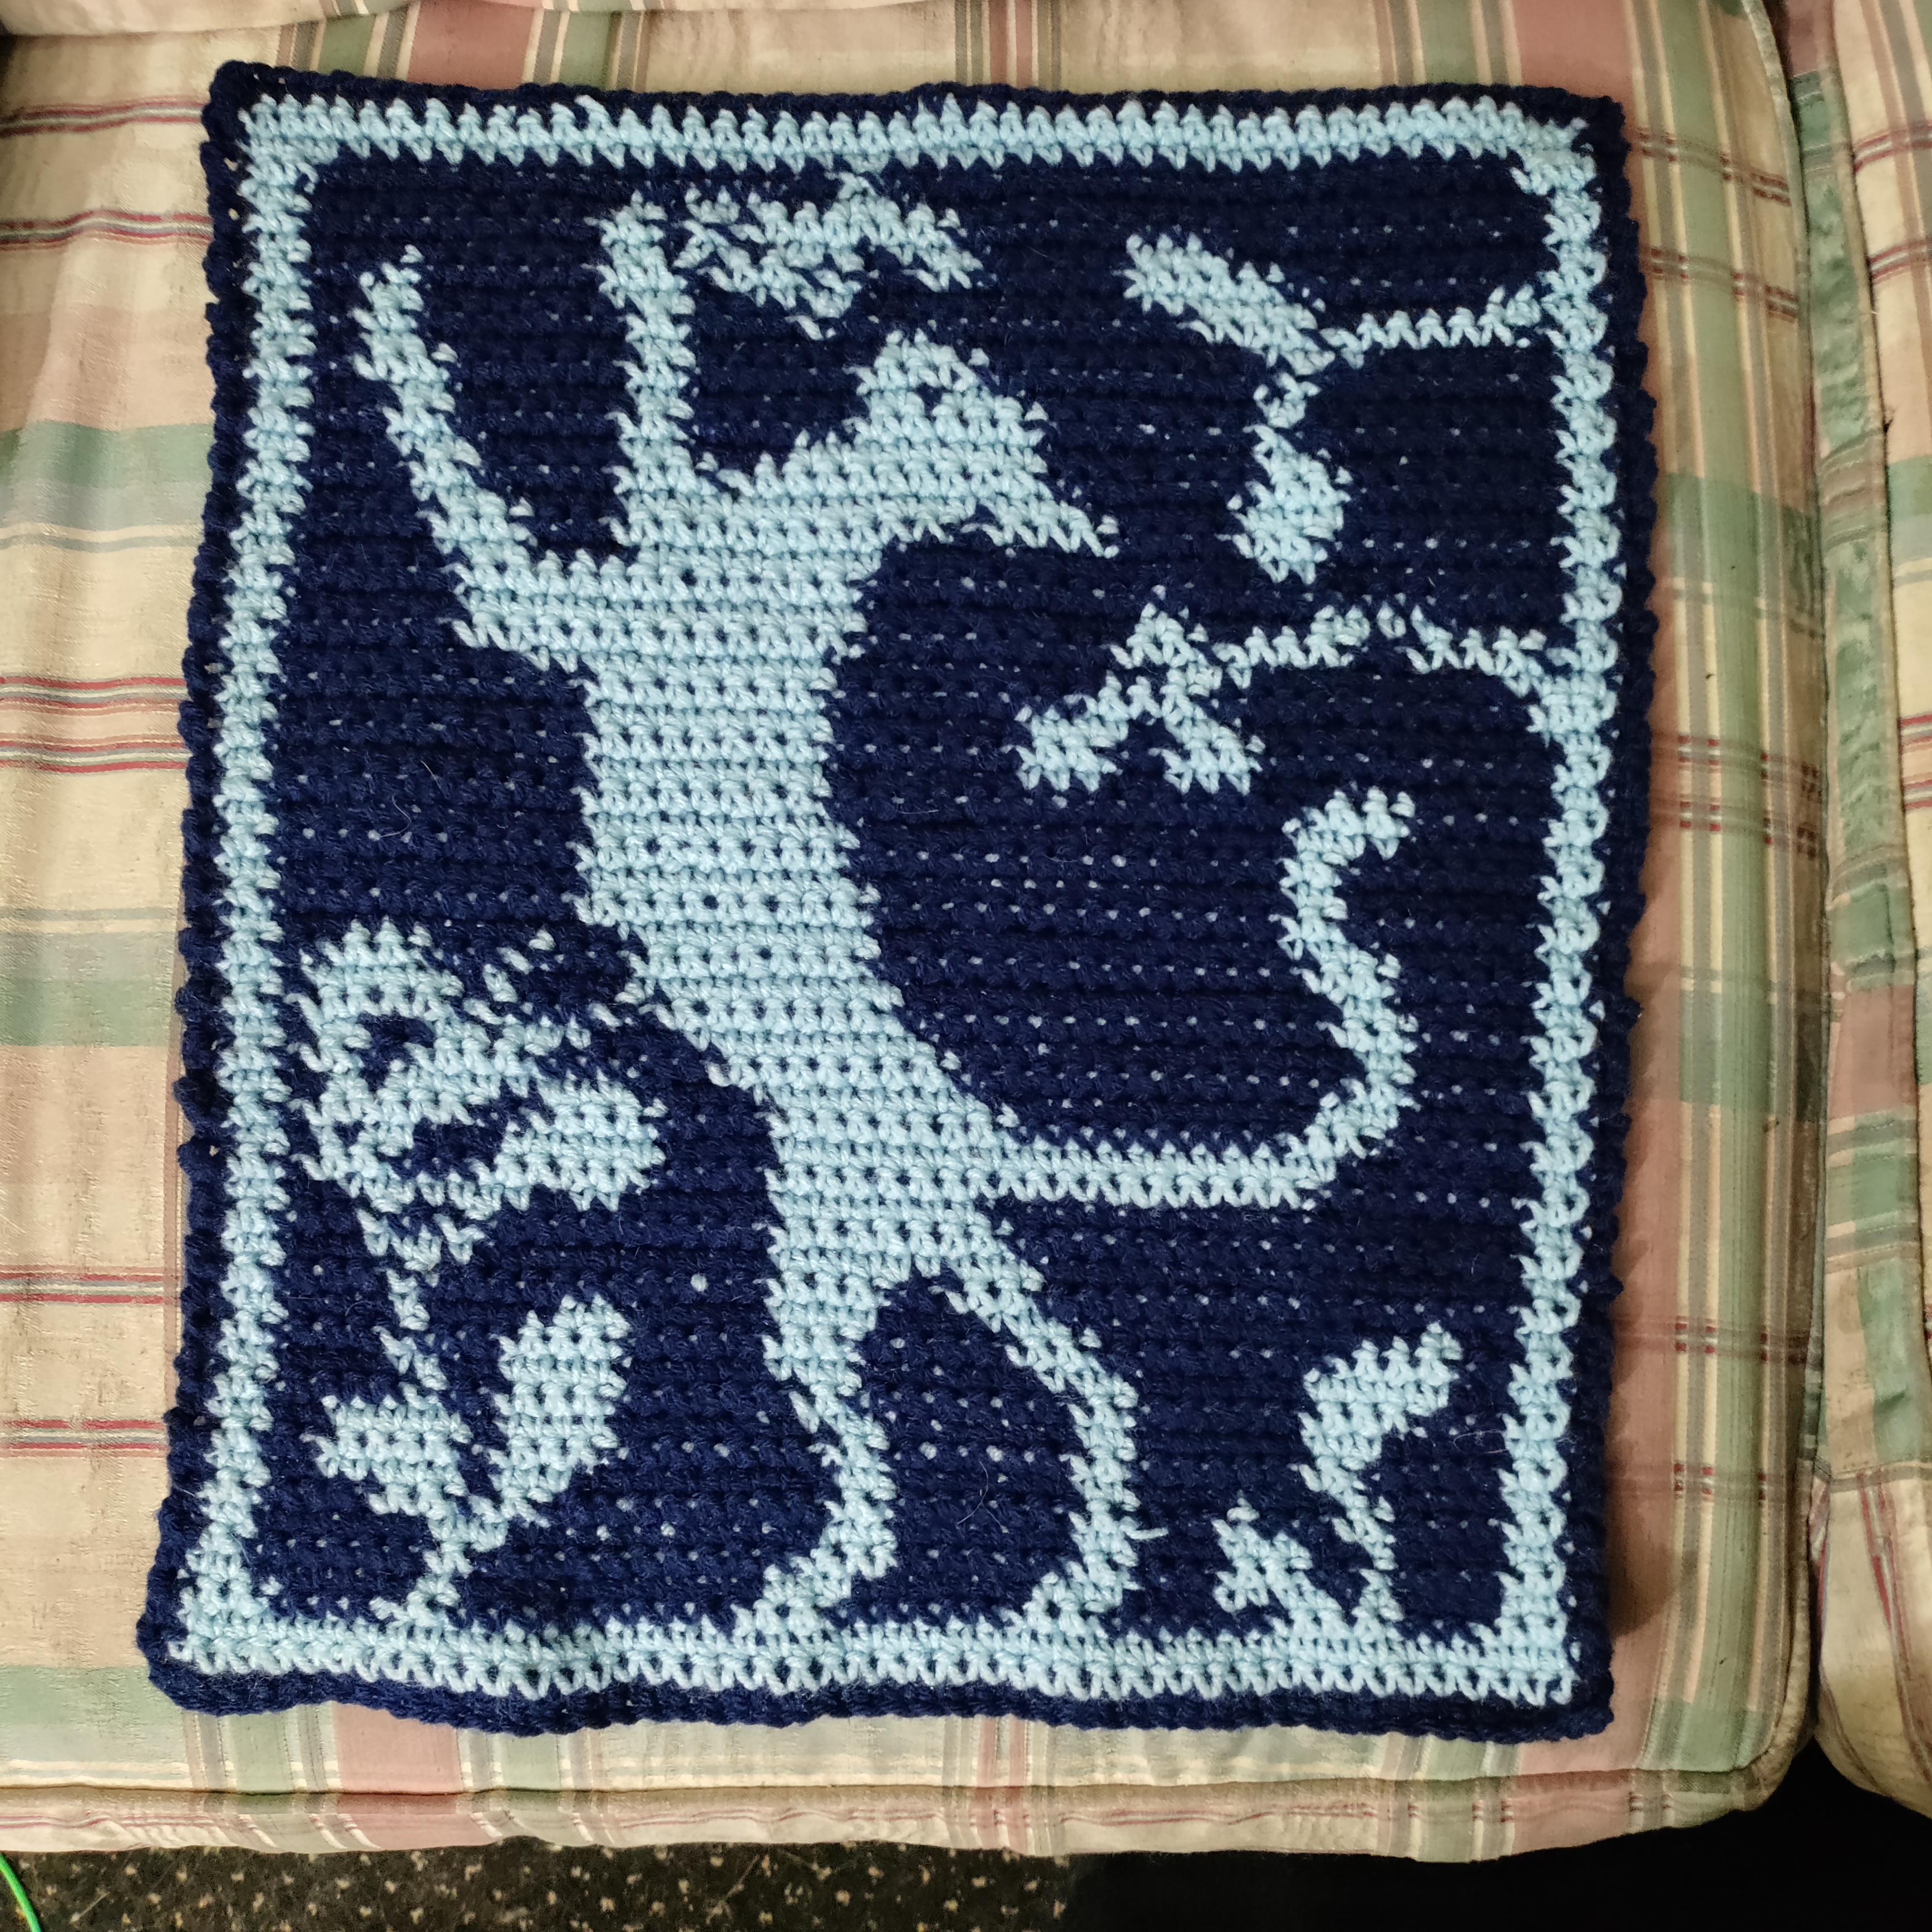 a light blue and dark blue wrinkly crocheted tapestry depicting a cat standing up on its back feet attempting to catch a butterfly next to its face with leaves and another butterfly on a flower in the background, there are gaps between stitches letting other color yarn show through